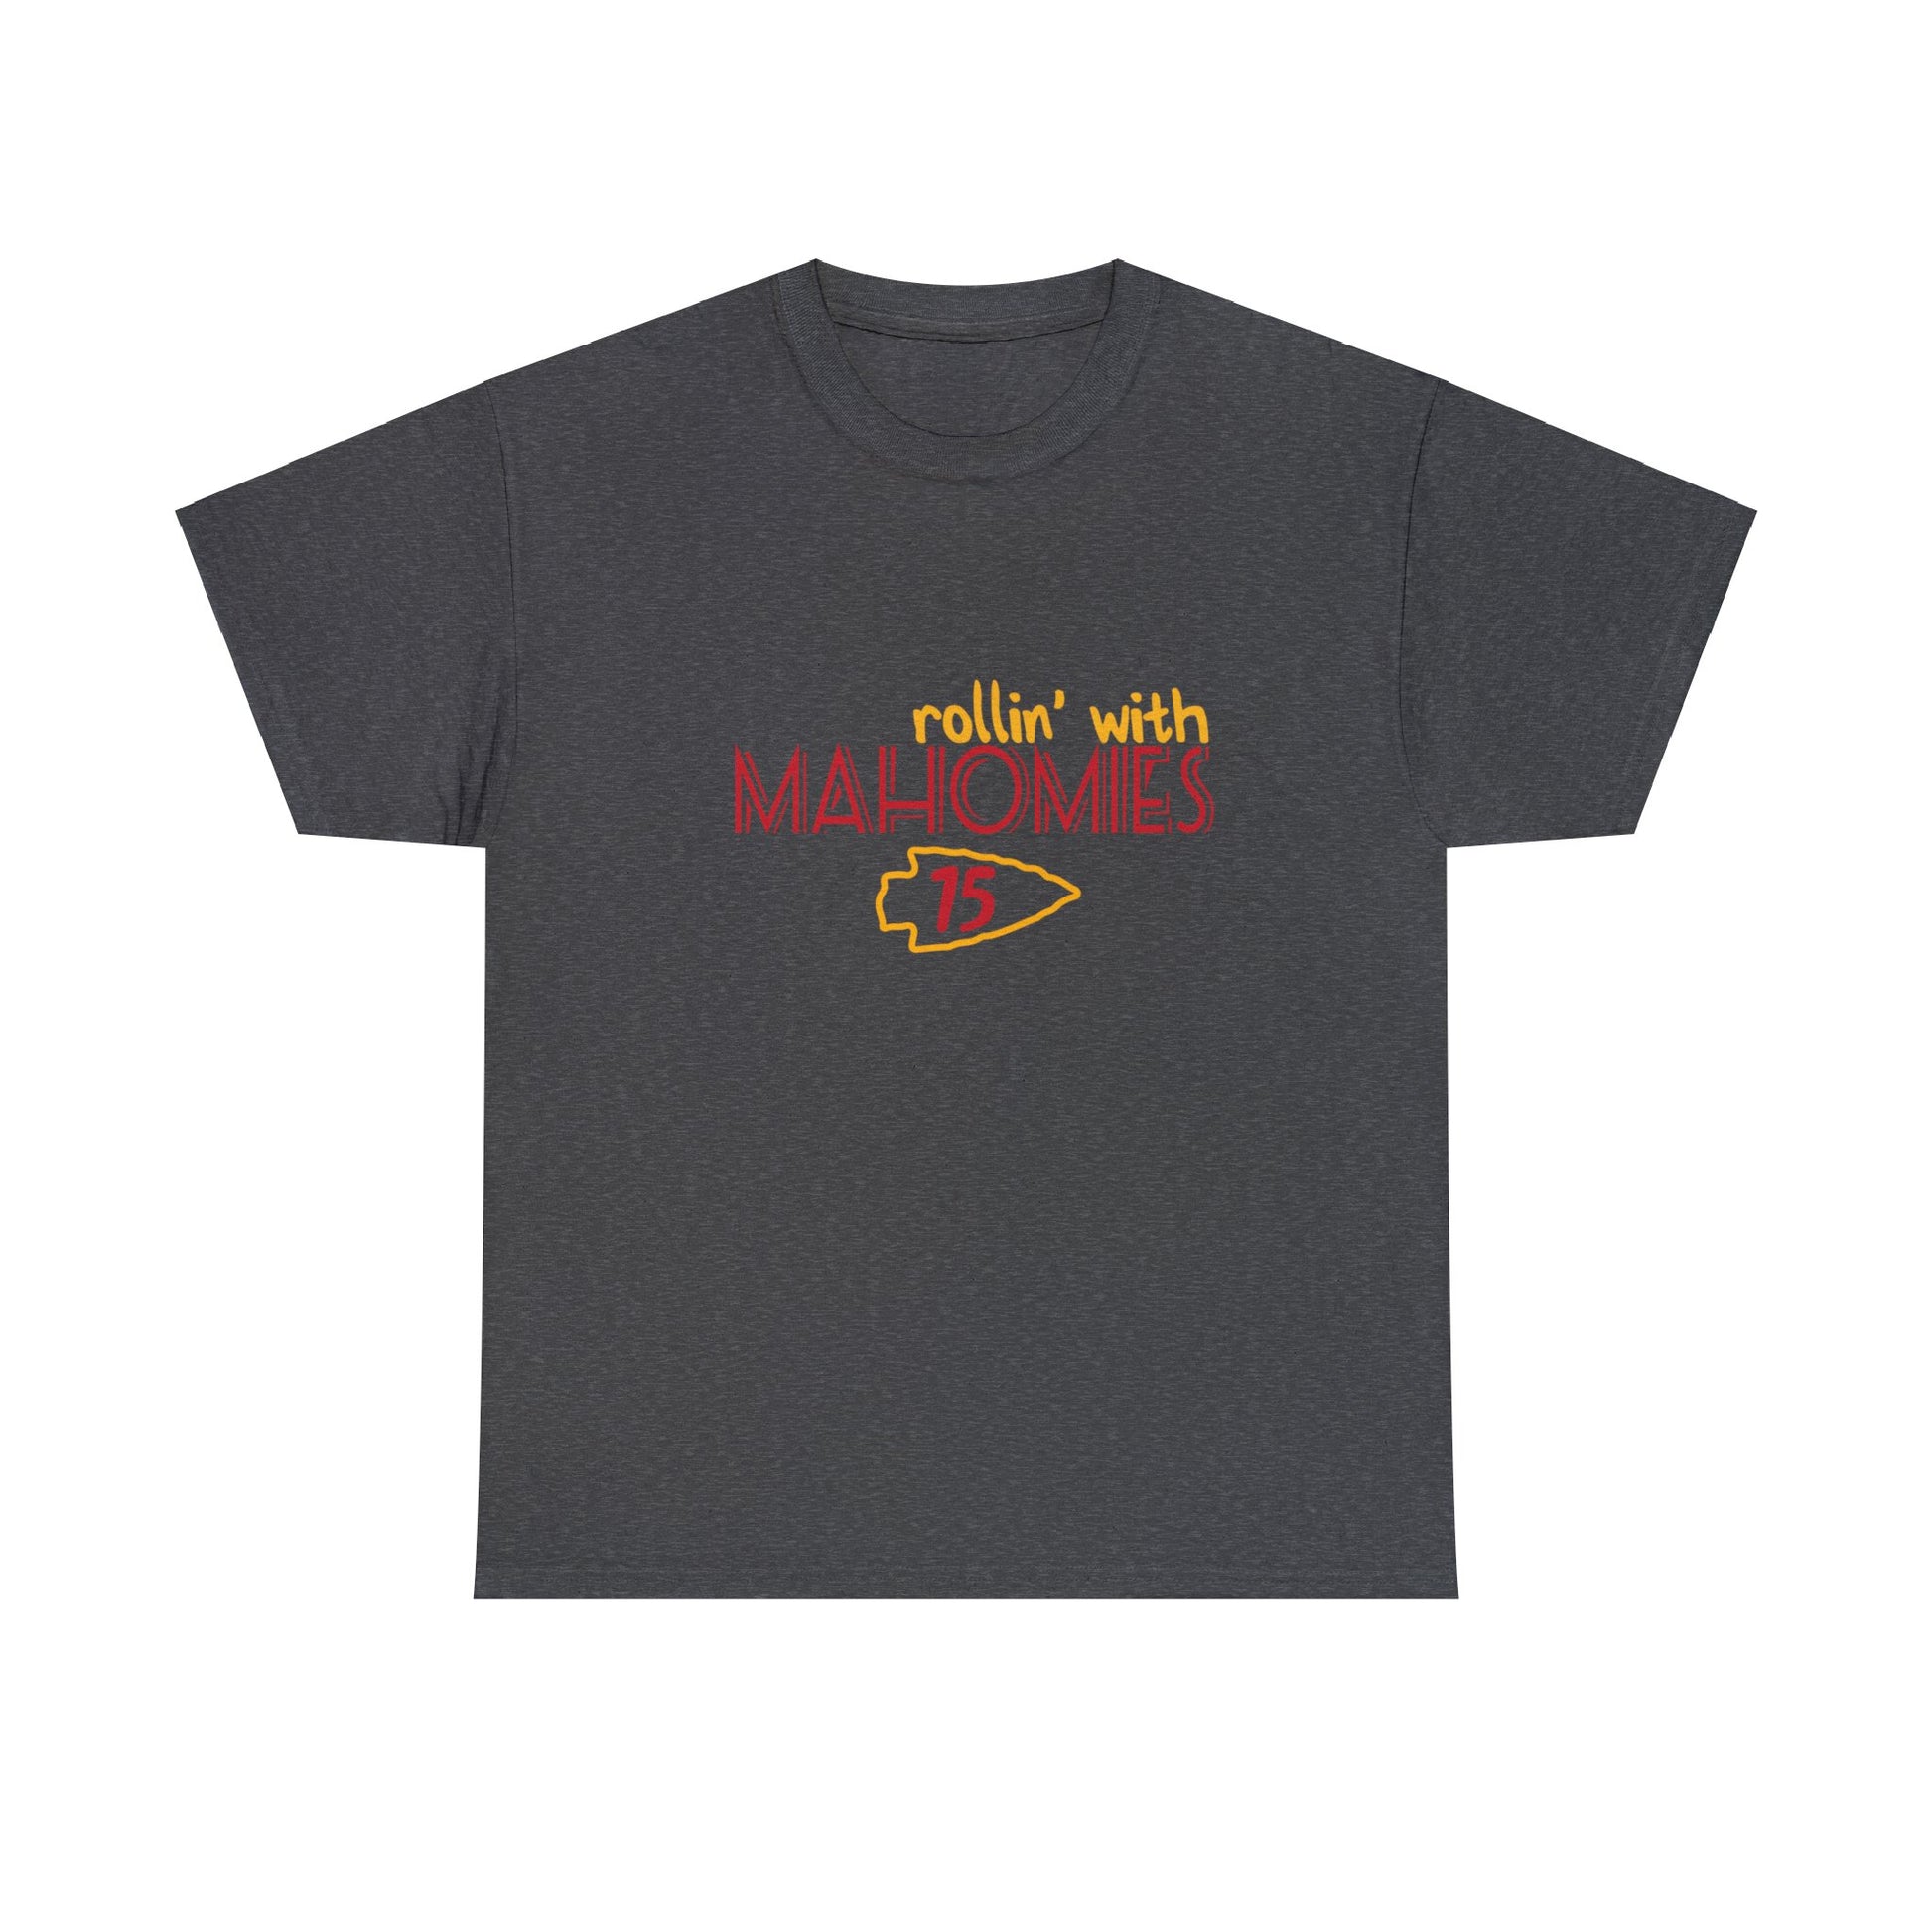 Unisex heavy cotton "Rollin With Mahomies" T-shirt for Chiefs Nation.